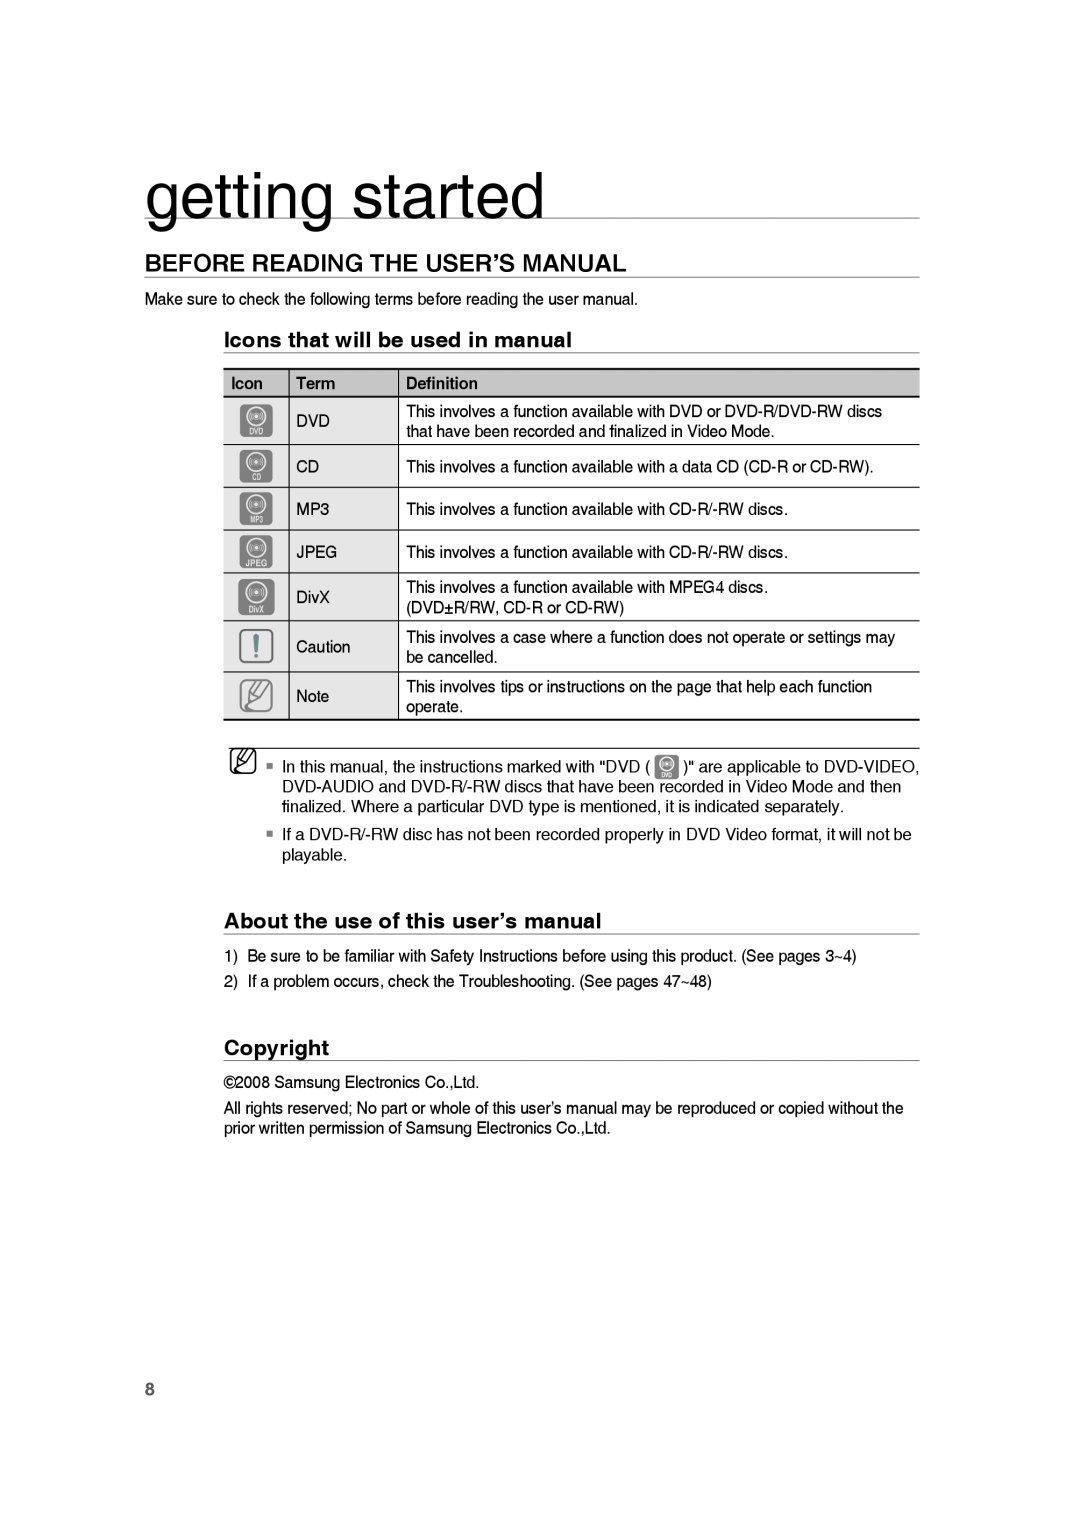 Samsung HE10T user manual getting started, Icons that will be used in manual, Copyright, Term, Deﬁnition 